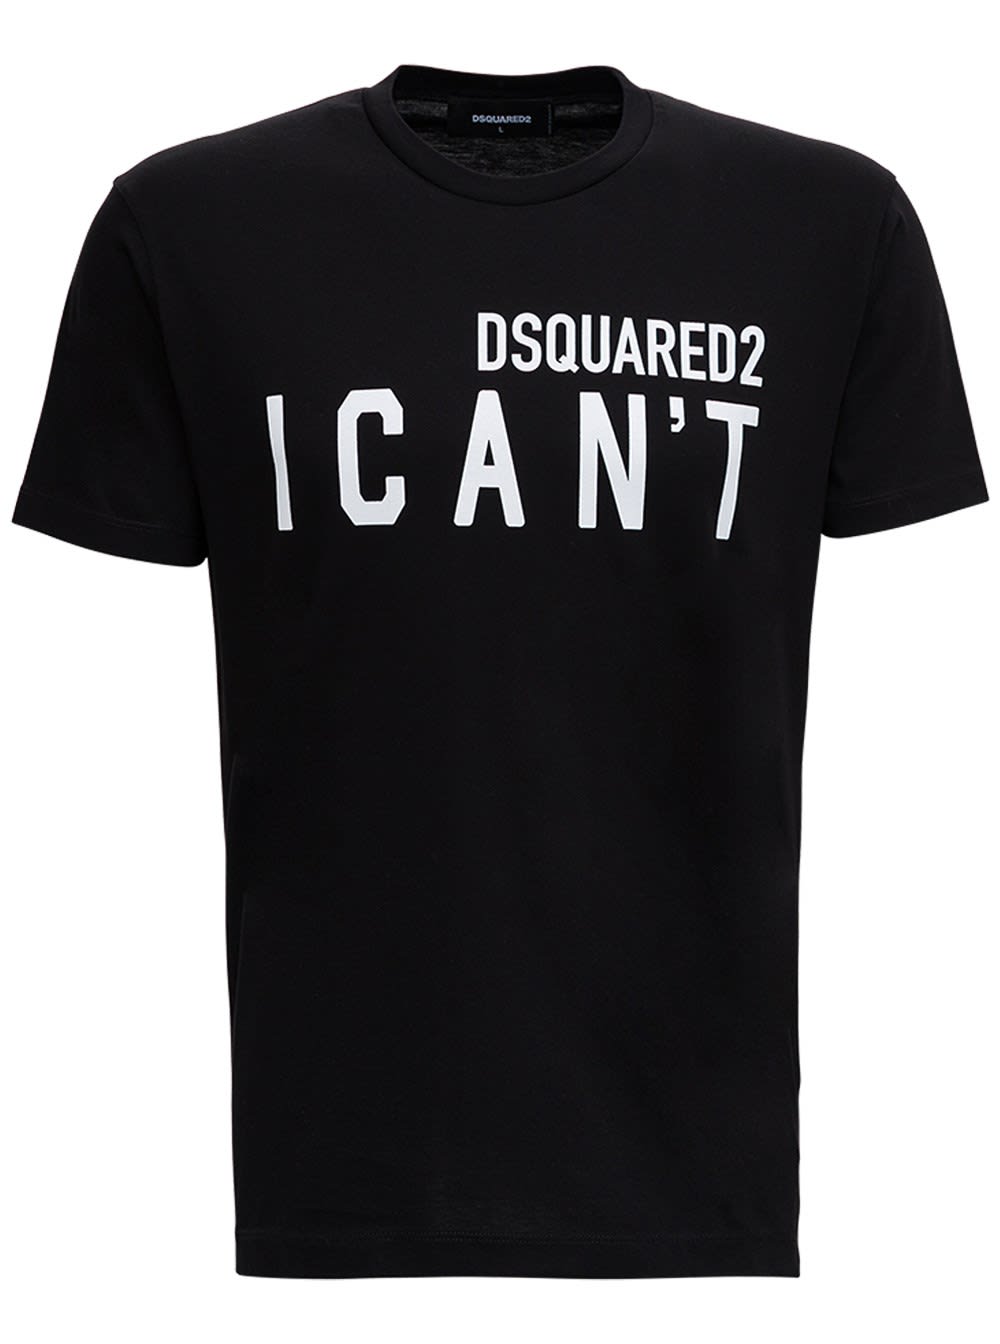 Dsquared2 i Cant Cotton T-shirt